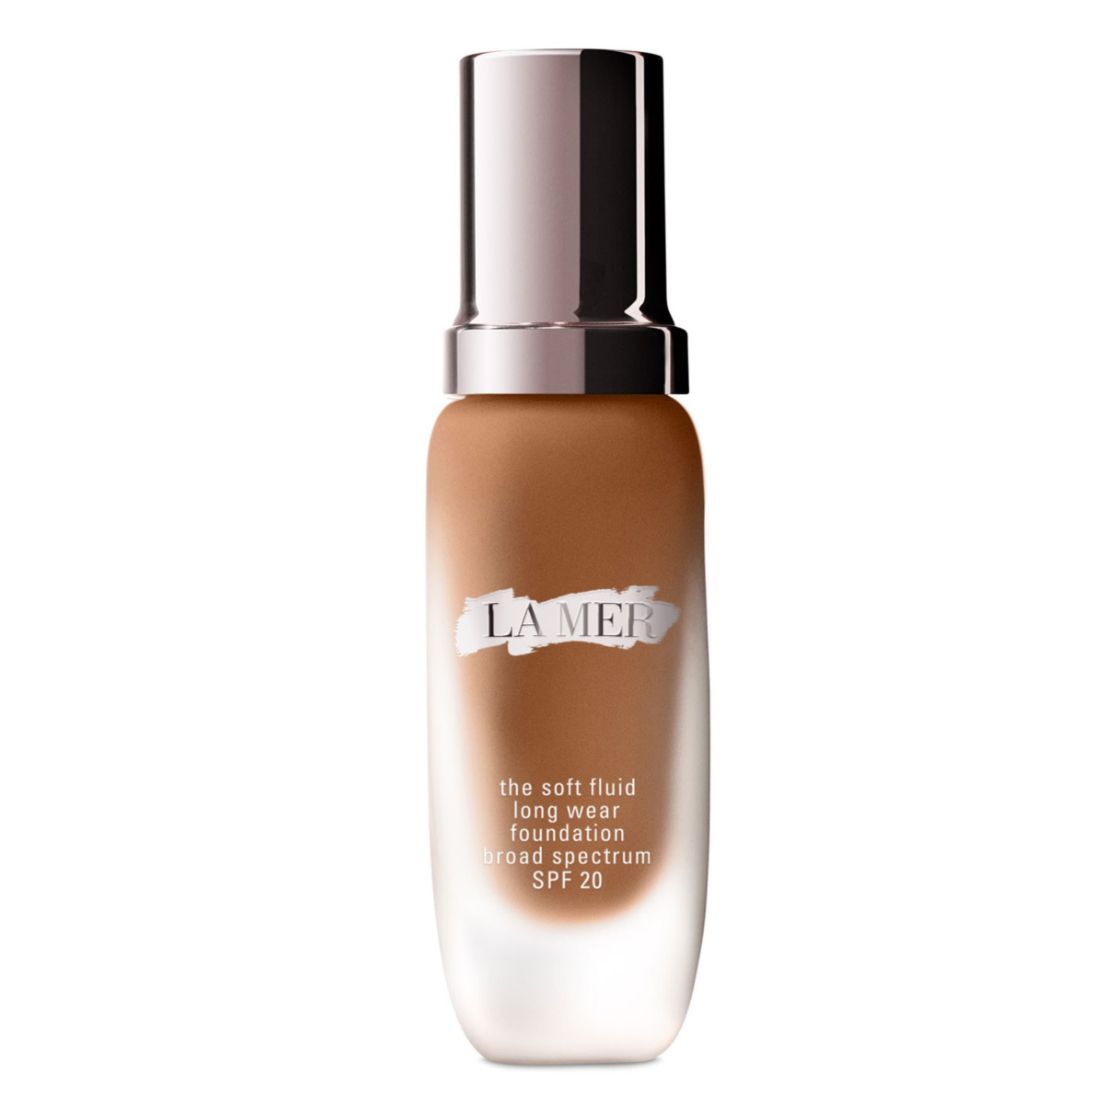 23 Best Foundations for Mature Skin 2023 - Top Anti Aging Foundations